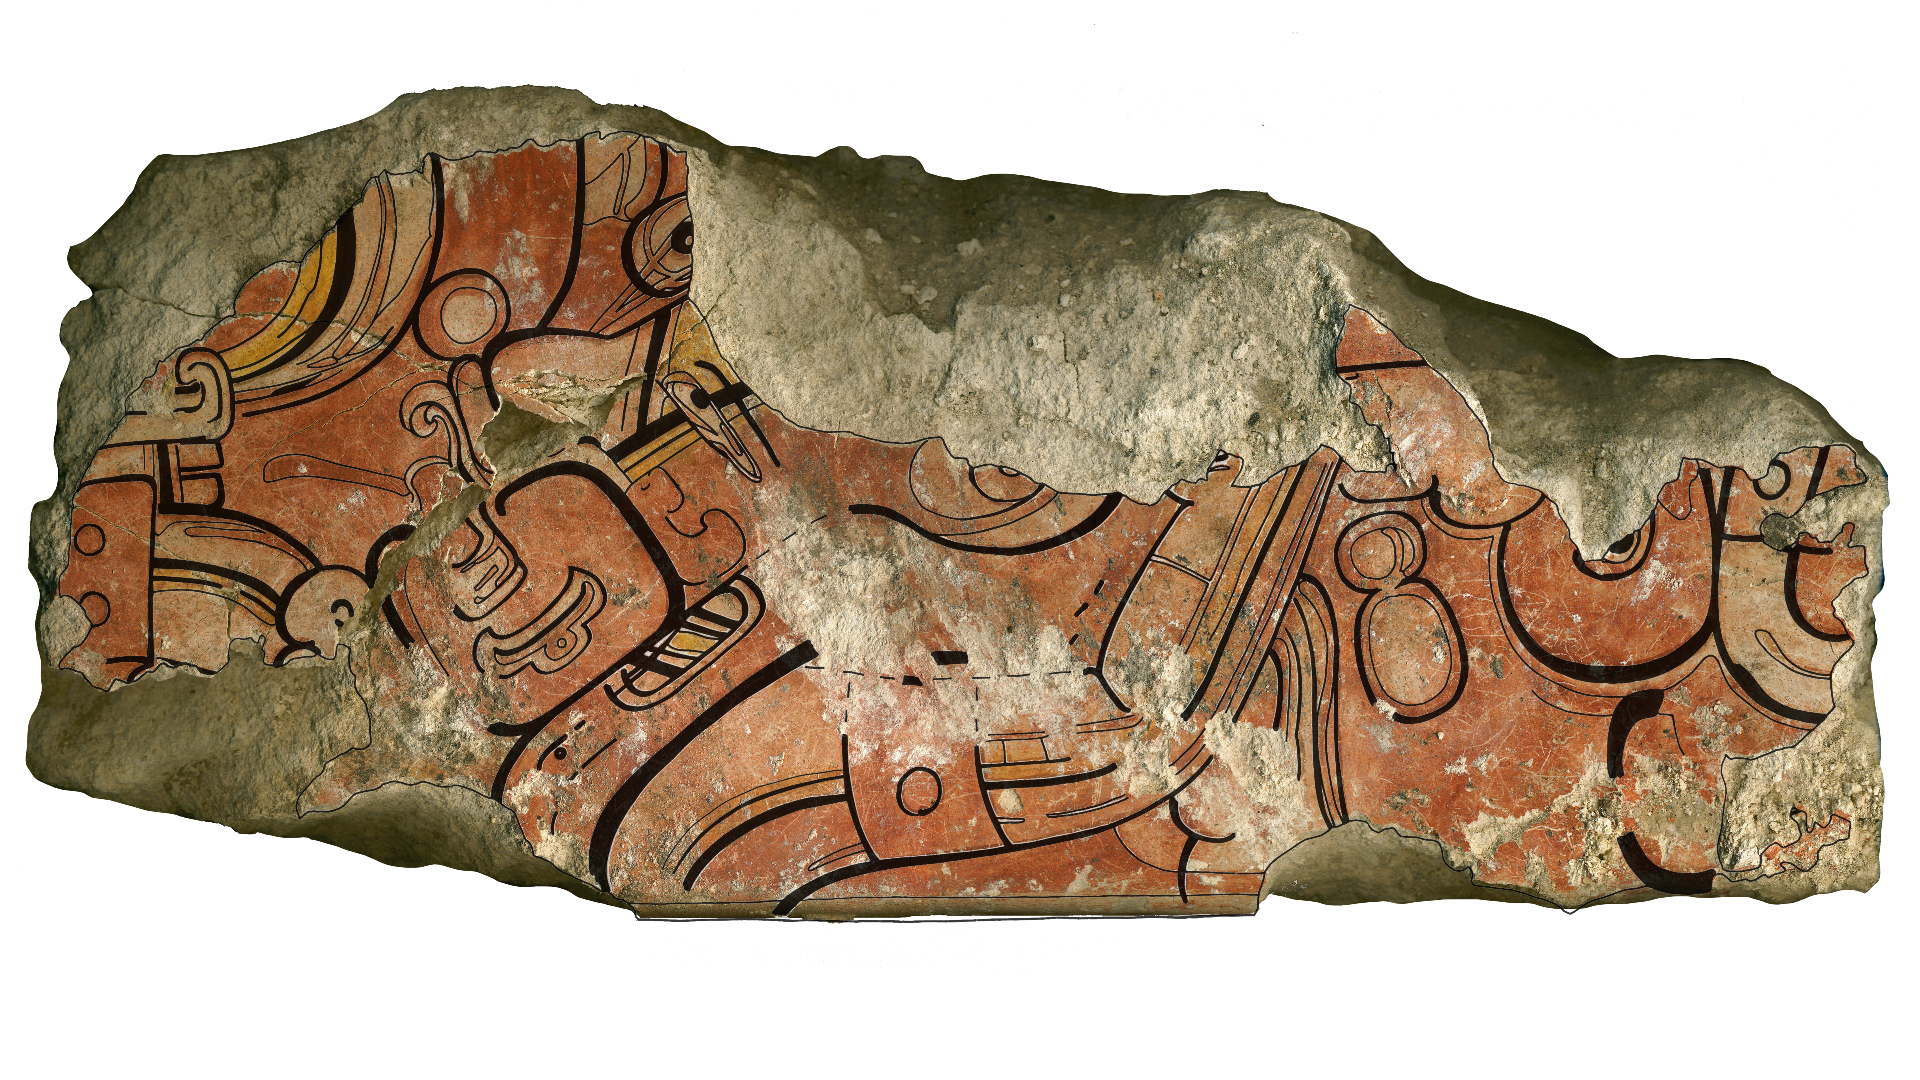 Mural fragments on masonry blocks associated with the structure of the Ixbalamque Mountains. A wall fragment block from the Ixbalamque structure, Sub V architectural phase (300–200 BC), fragment #6368, depicting the image of the Maya corn god of the late Preclassic period.